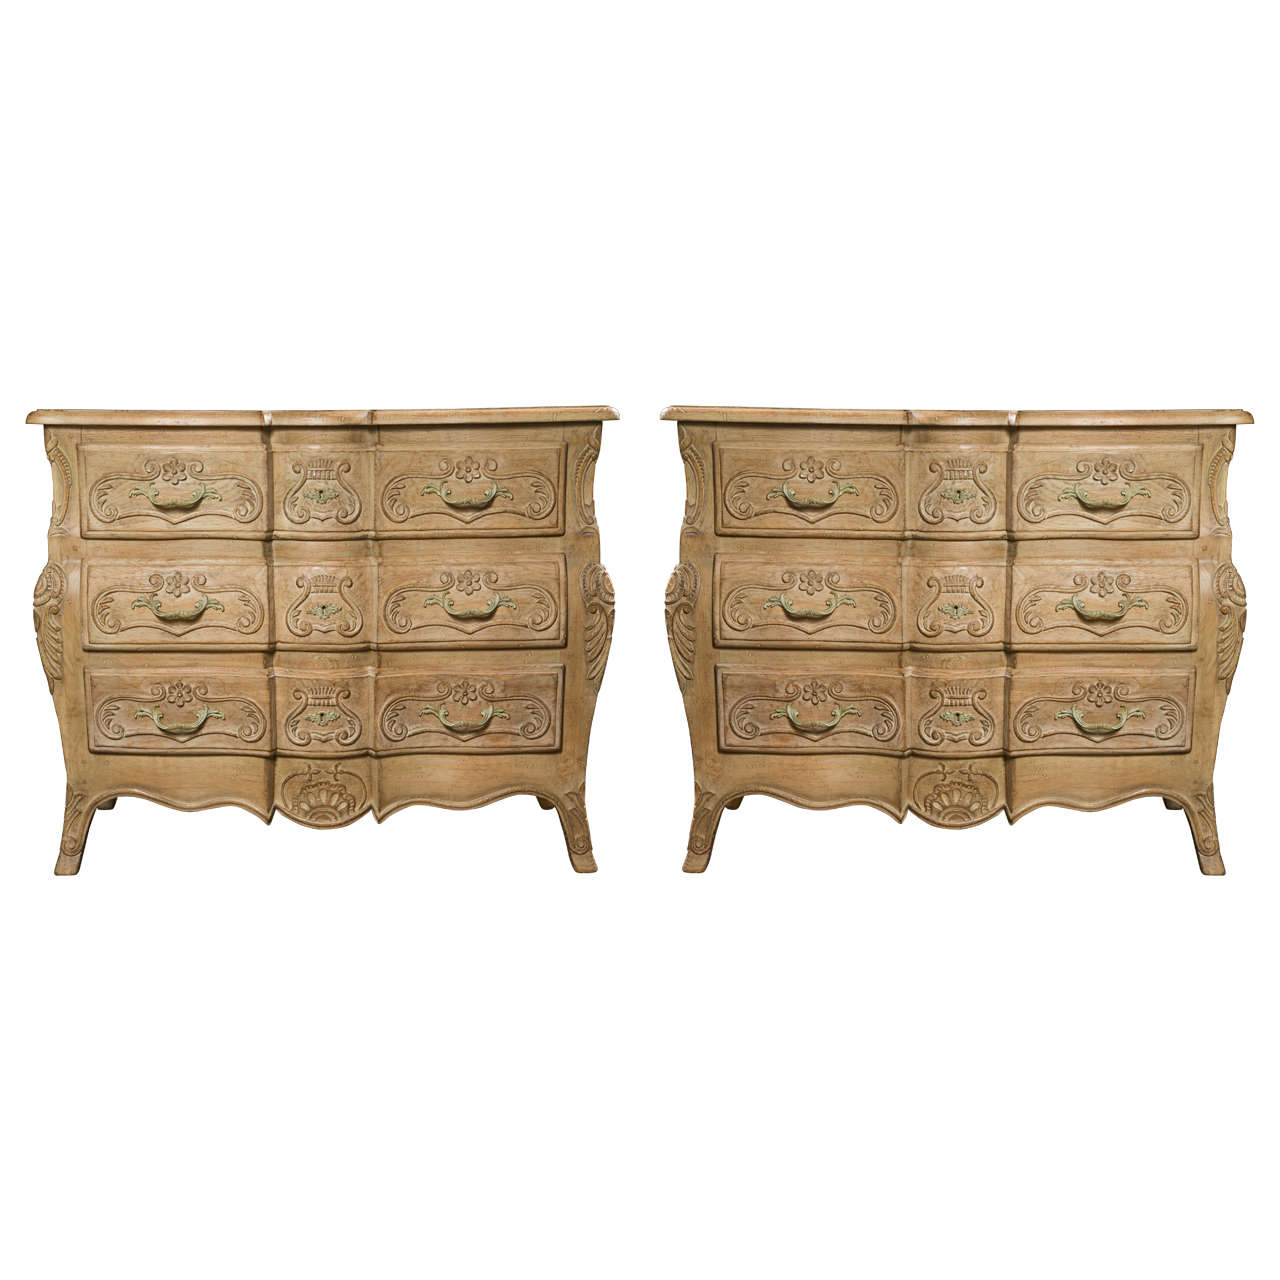 Pair of Bombe Distressed Chests by Jansen